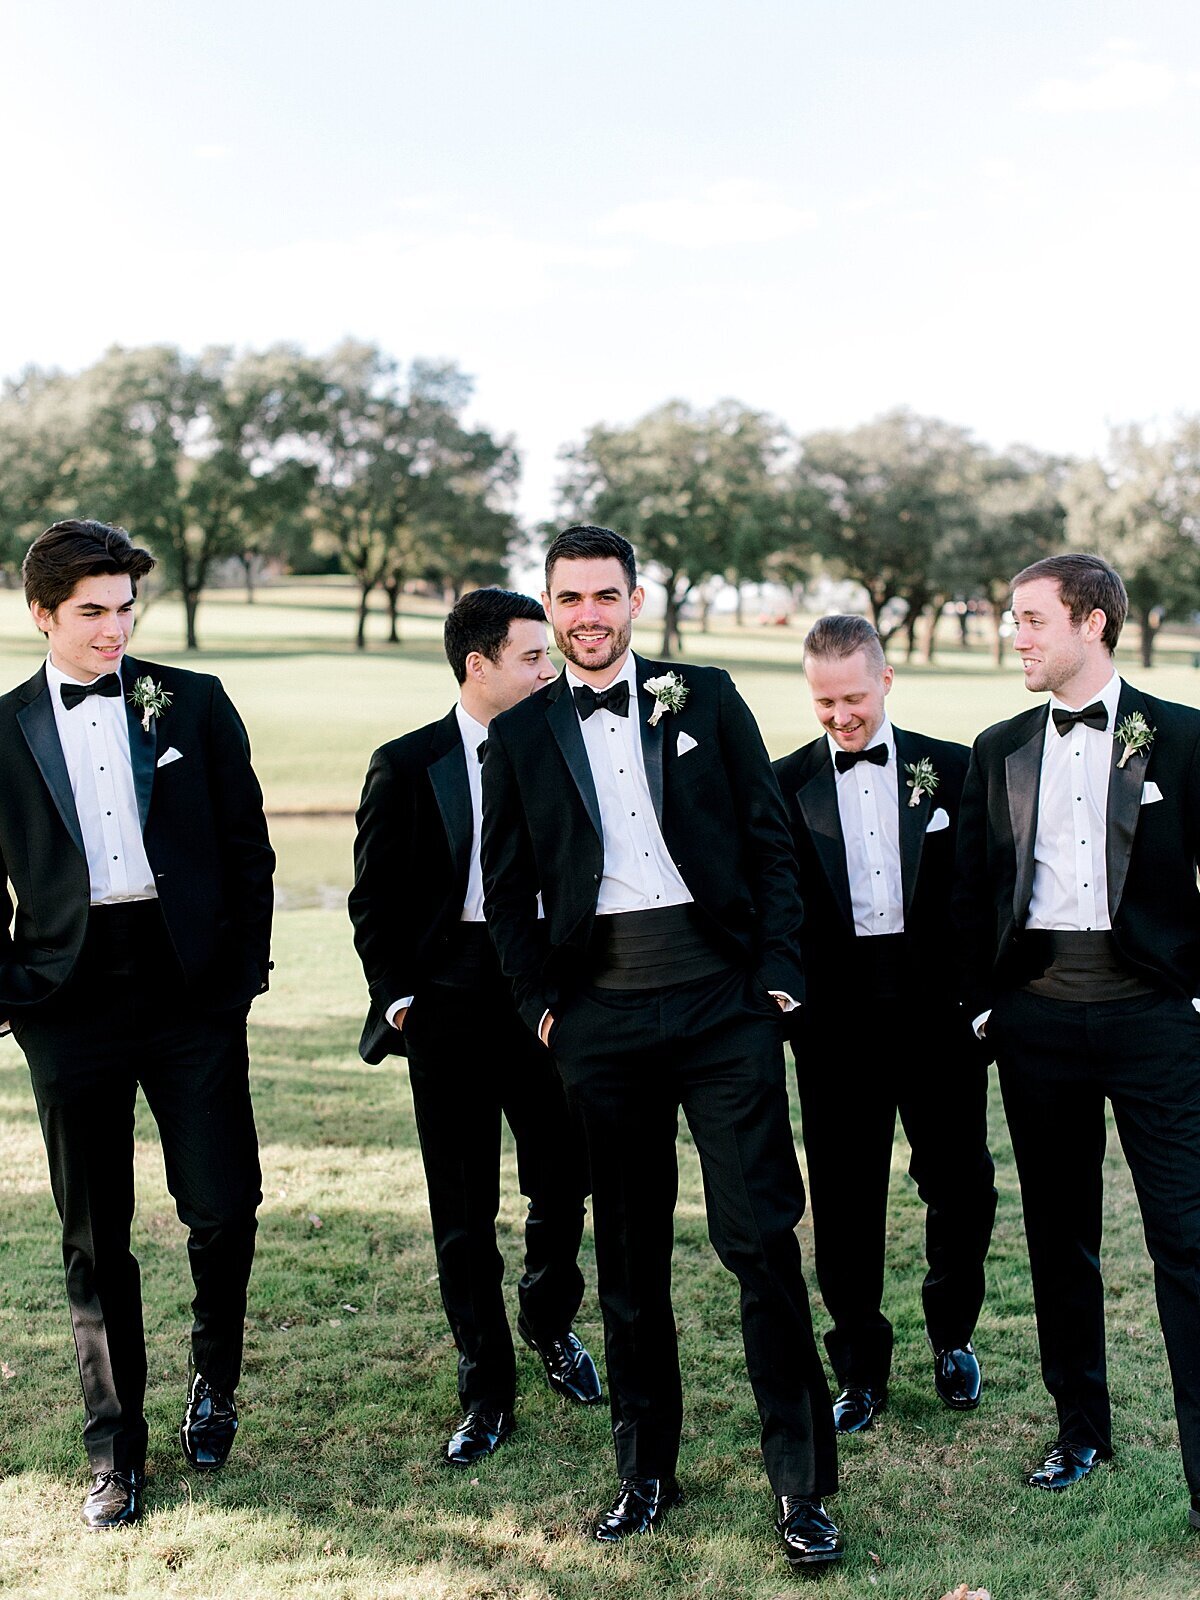 Groomsmen at Dallas Forth Worth Four Seasons | Boutonnières  by Vella Nest Floral Design in Dallas, Texas